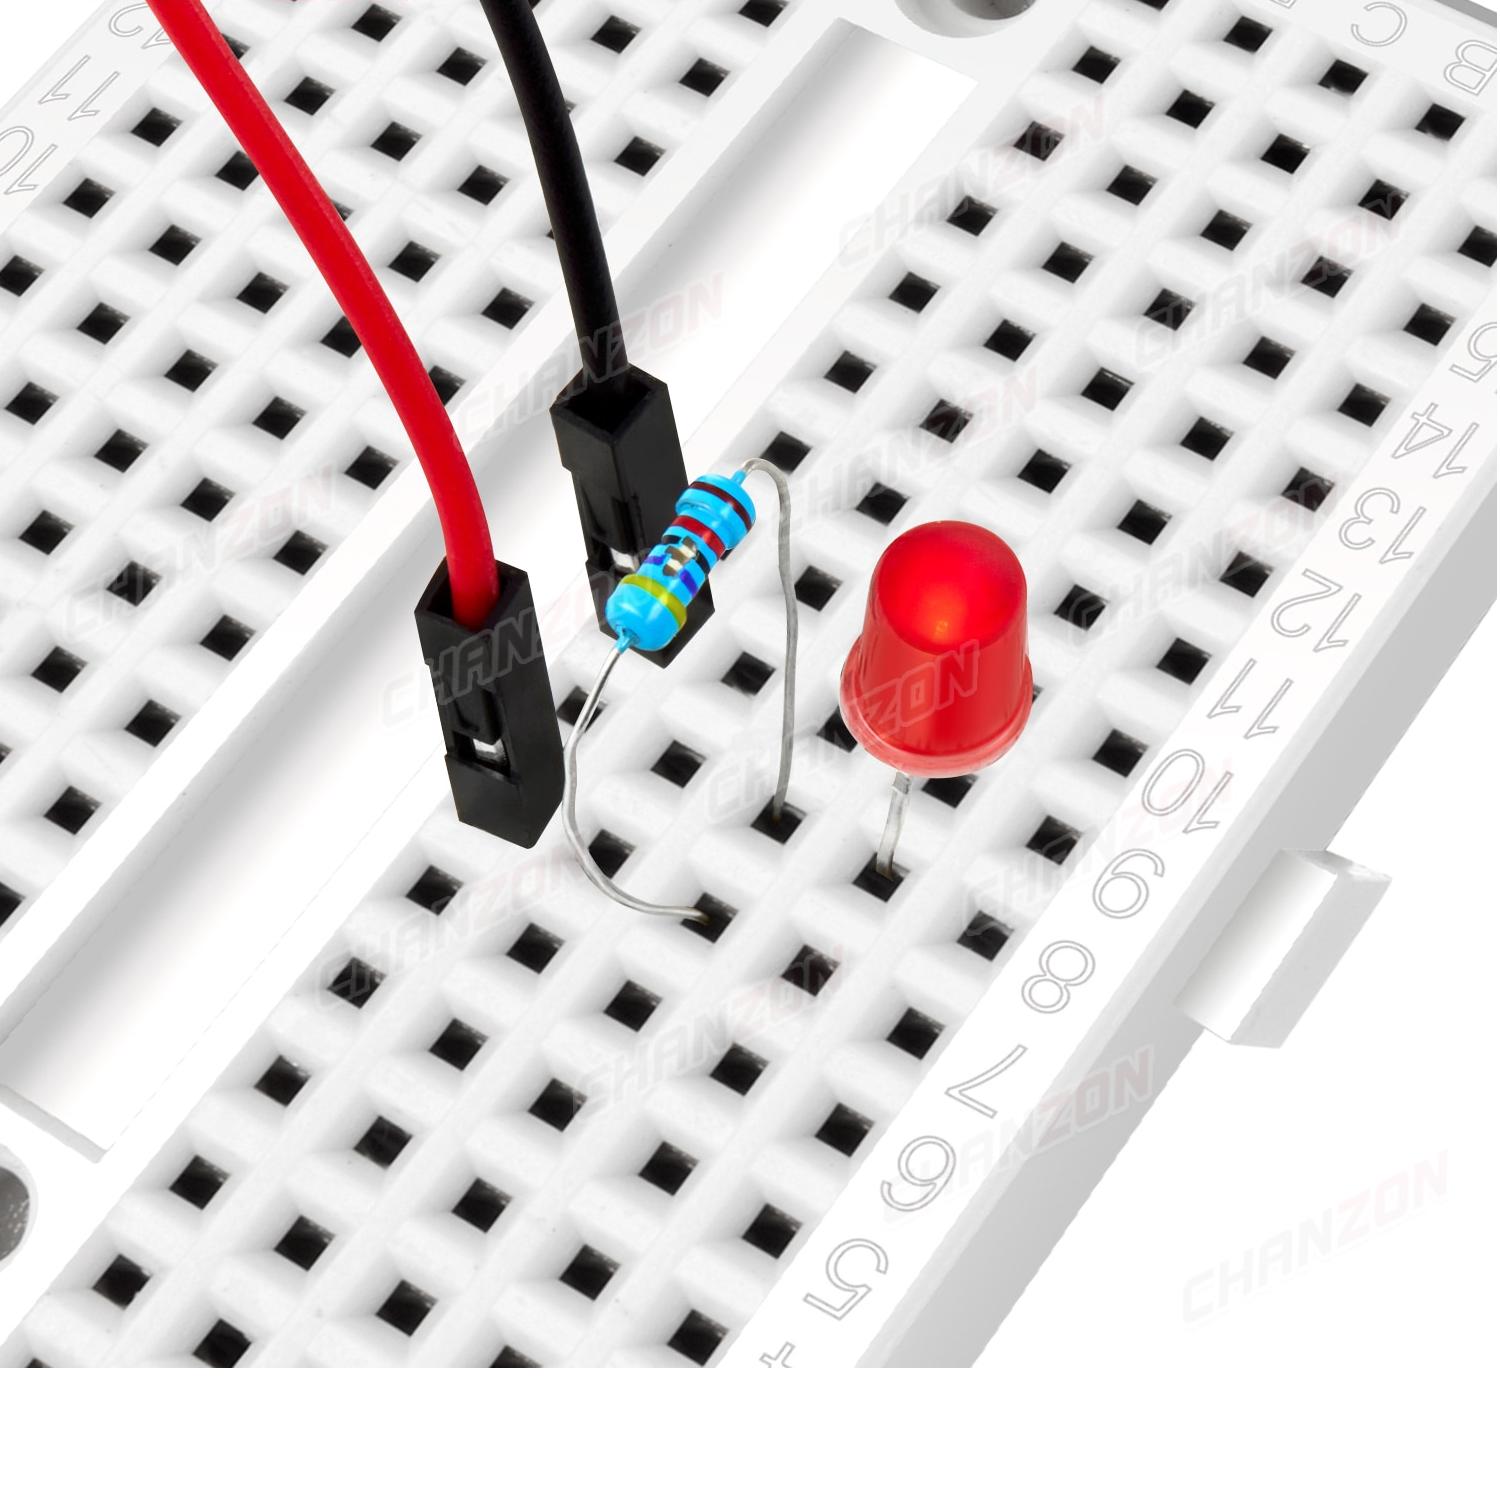 6-mini-breadboards-with-170-tie-points